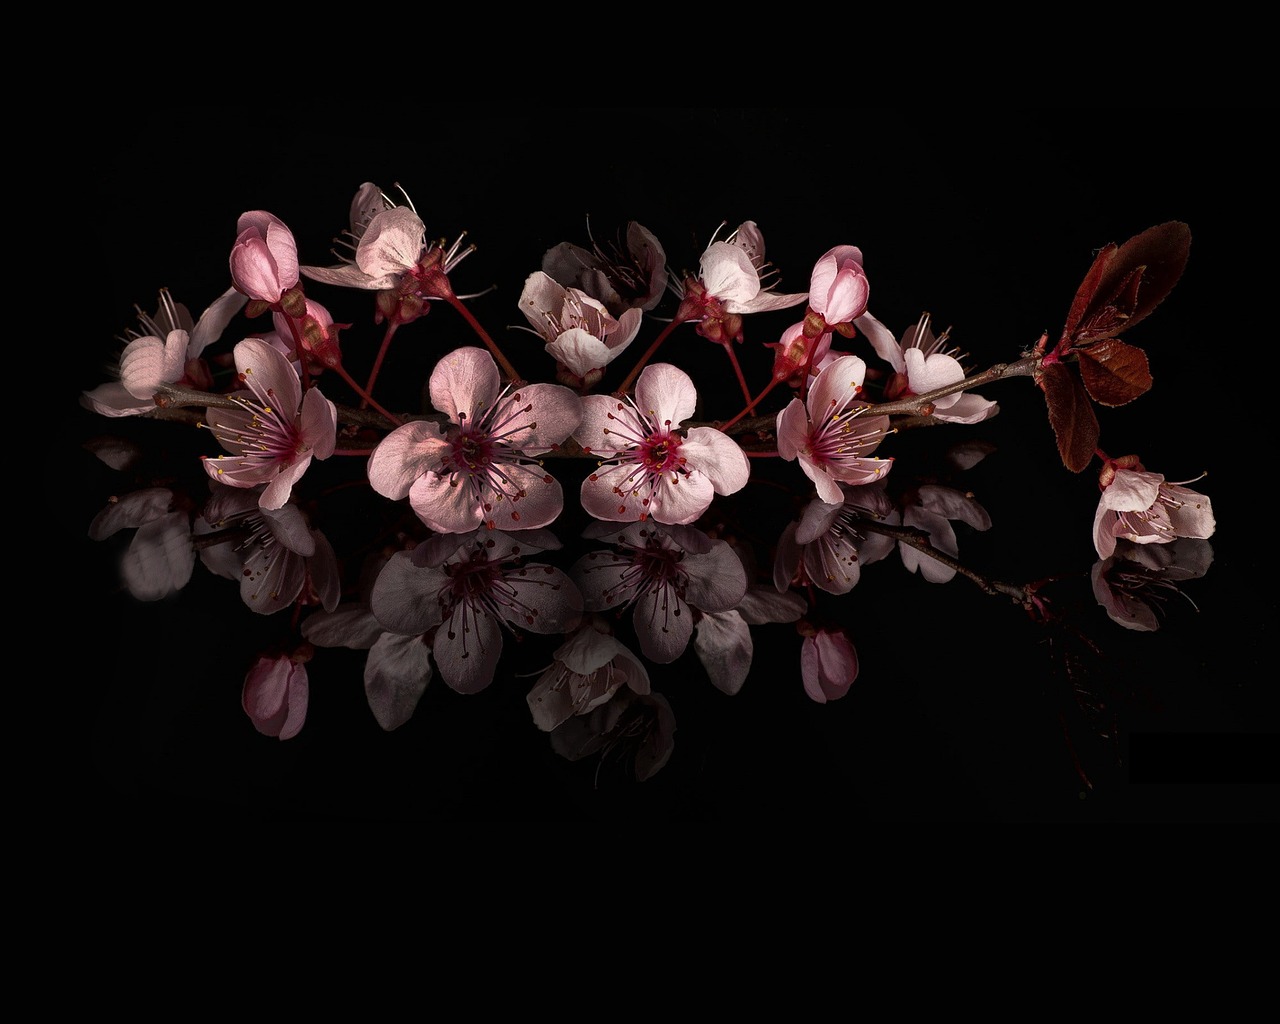 a group of pink flowers sitting on top of a black surface, a still life, inspired by Itō Jakuchū, hyperrealism, mirrored, cherry blosom trees, intricate art photography, david kassan